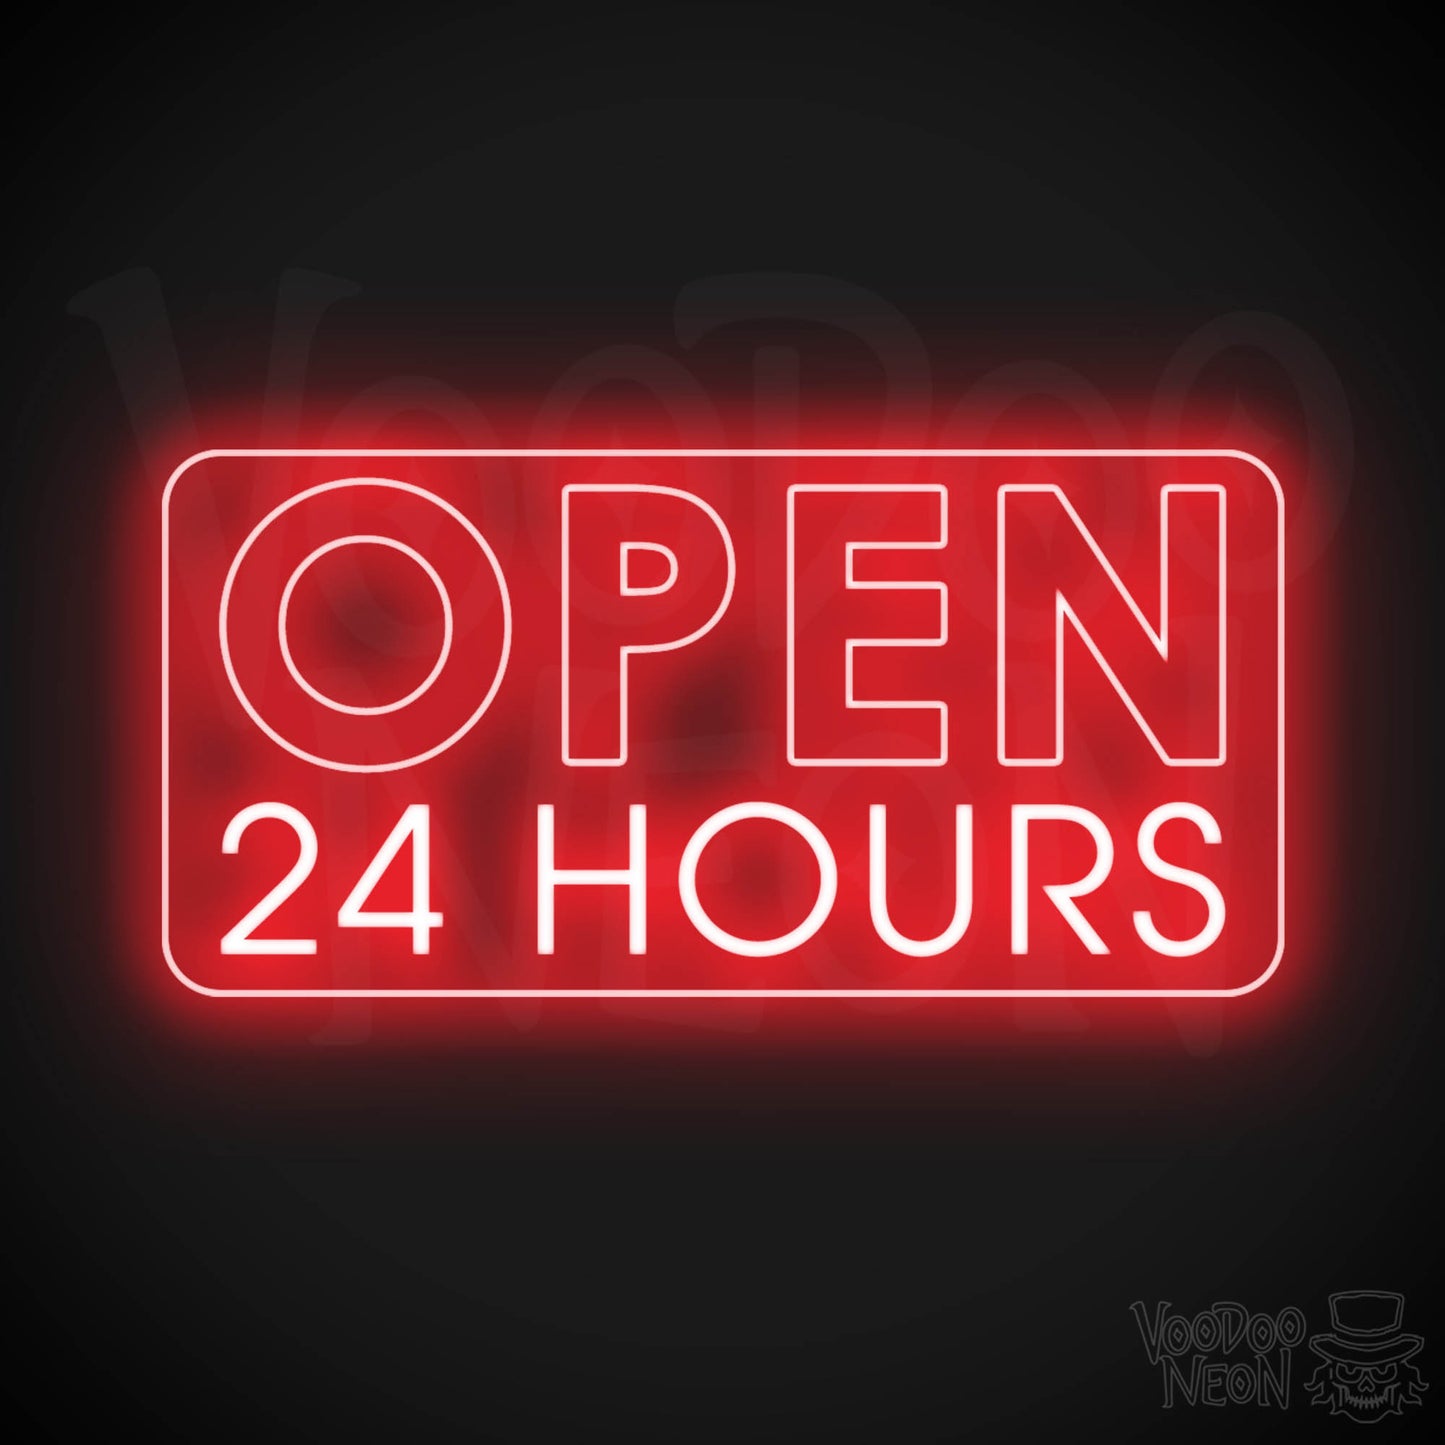 Open 24 Hours Neon Sign - Neon Open 24 Hours Sign - Shop Signs - Color Red